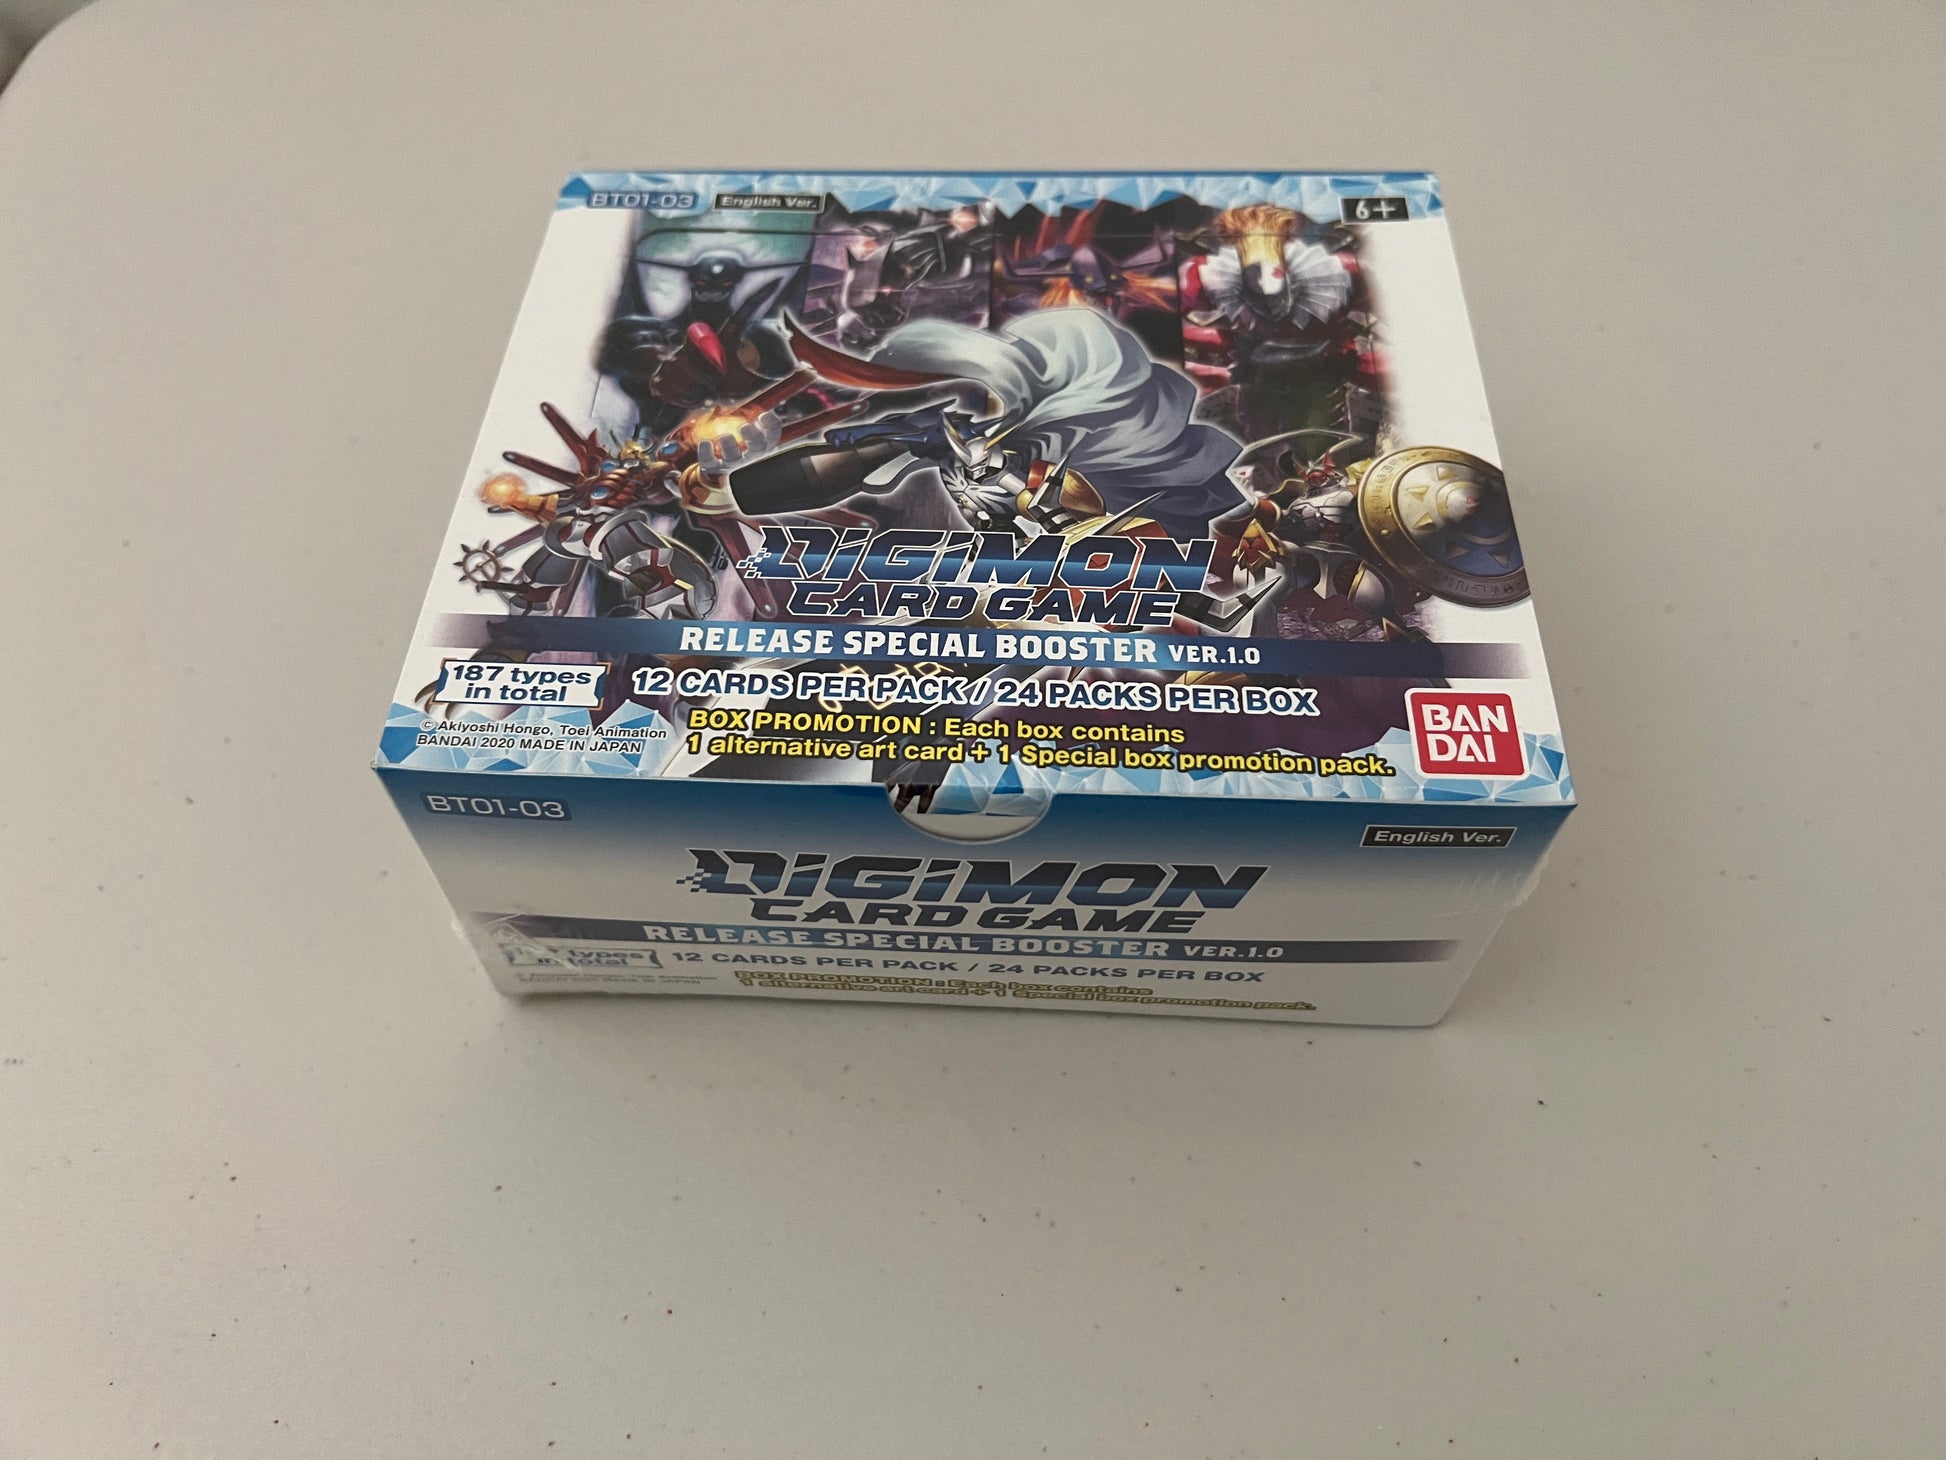 Digimon Release Special V1.0 Booster Box - English